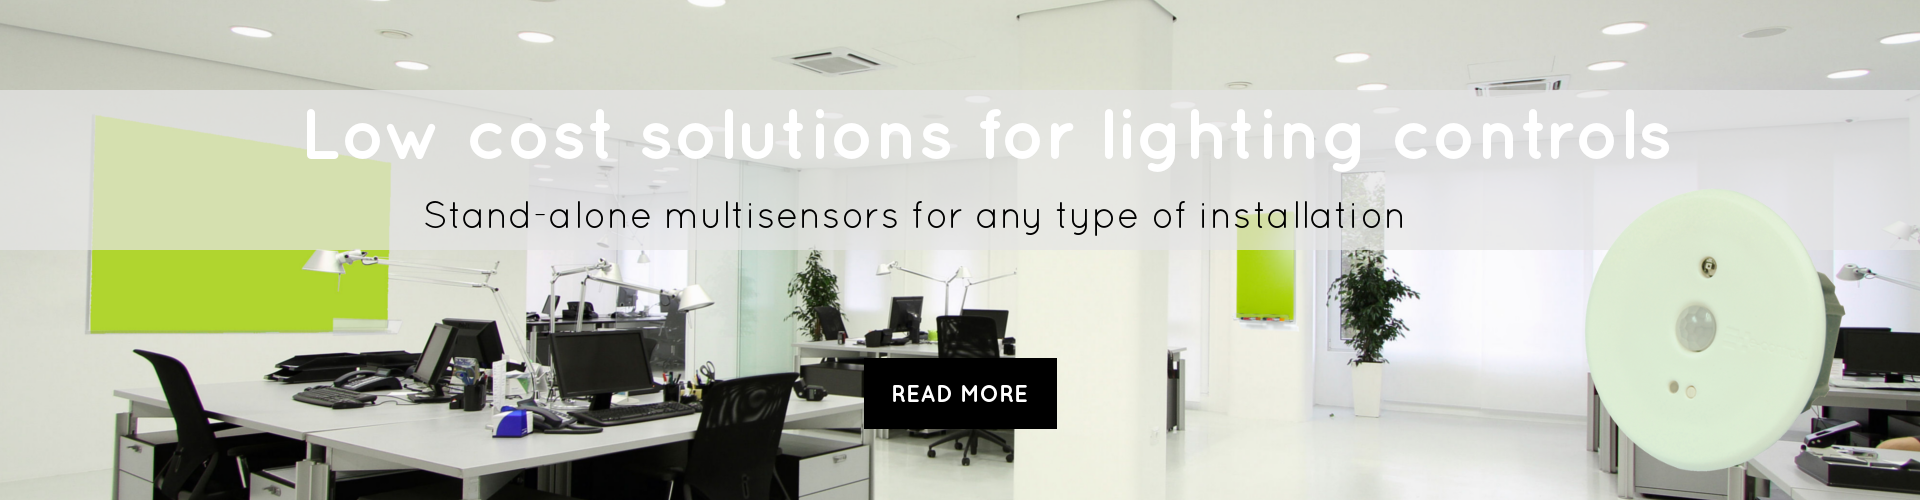 Low cost solutions for lighting controls stand-alone multisensors for any type of installation